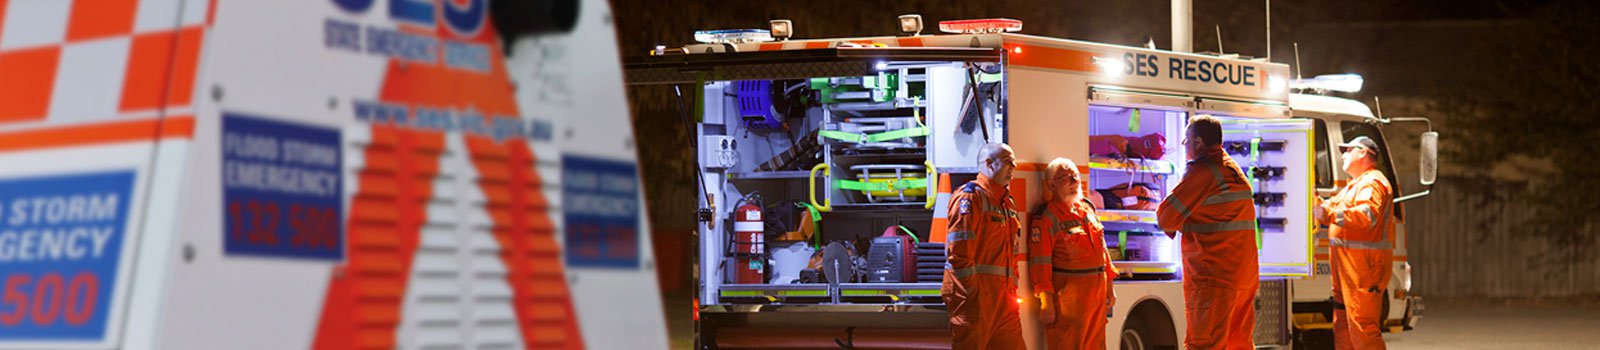 ses-rescue-at-night-with-volunteers